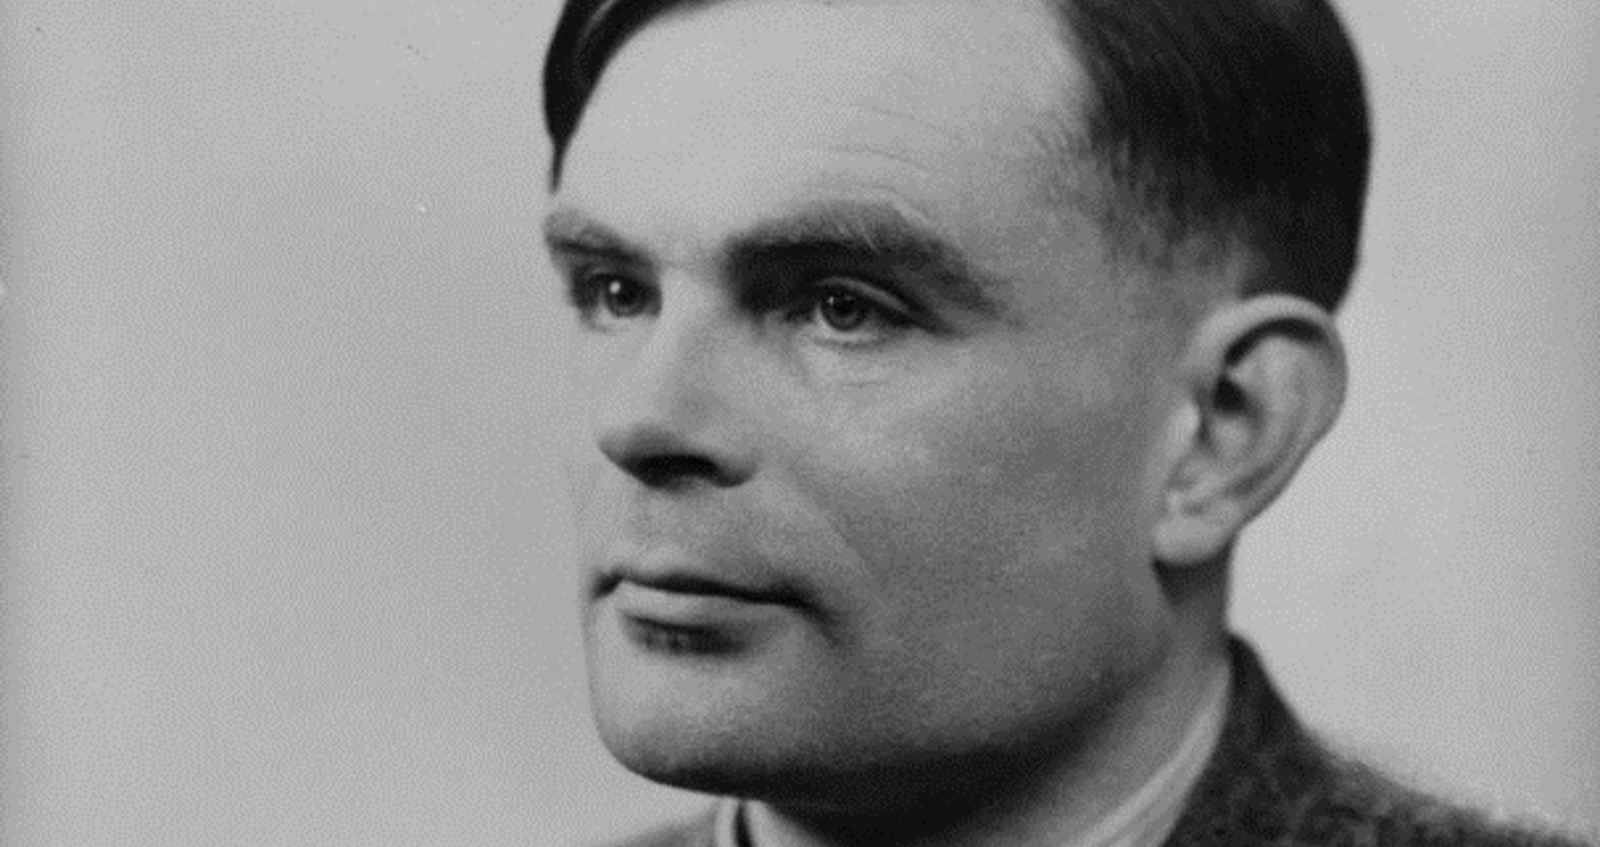 Alan Turing in 1951 © National Portrait Gallery, London